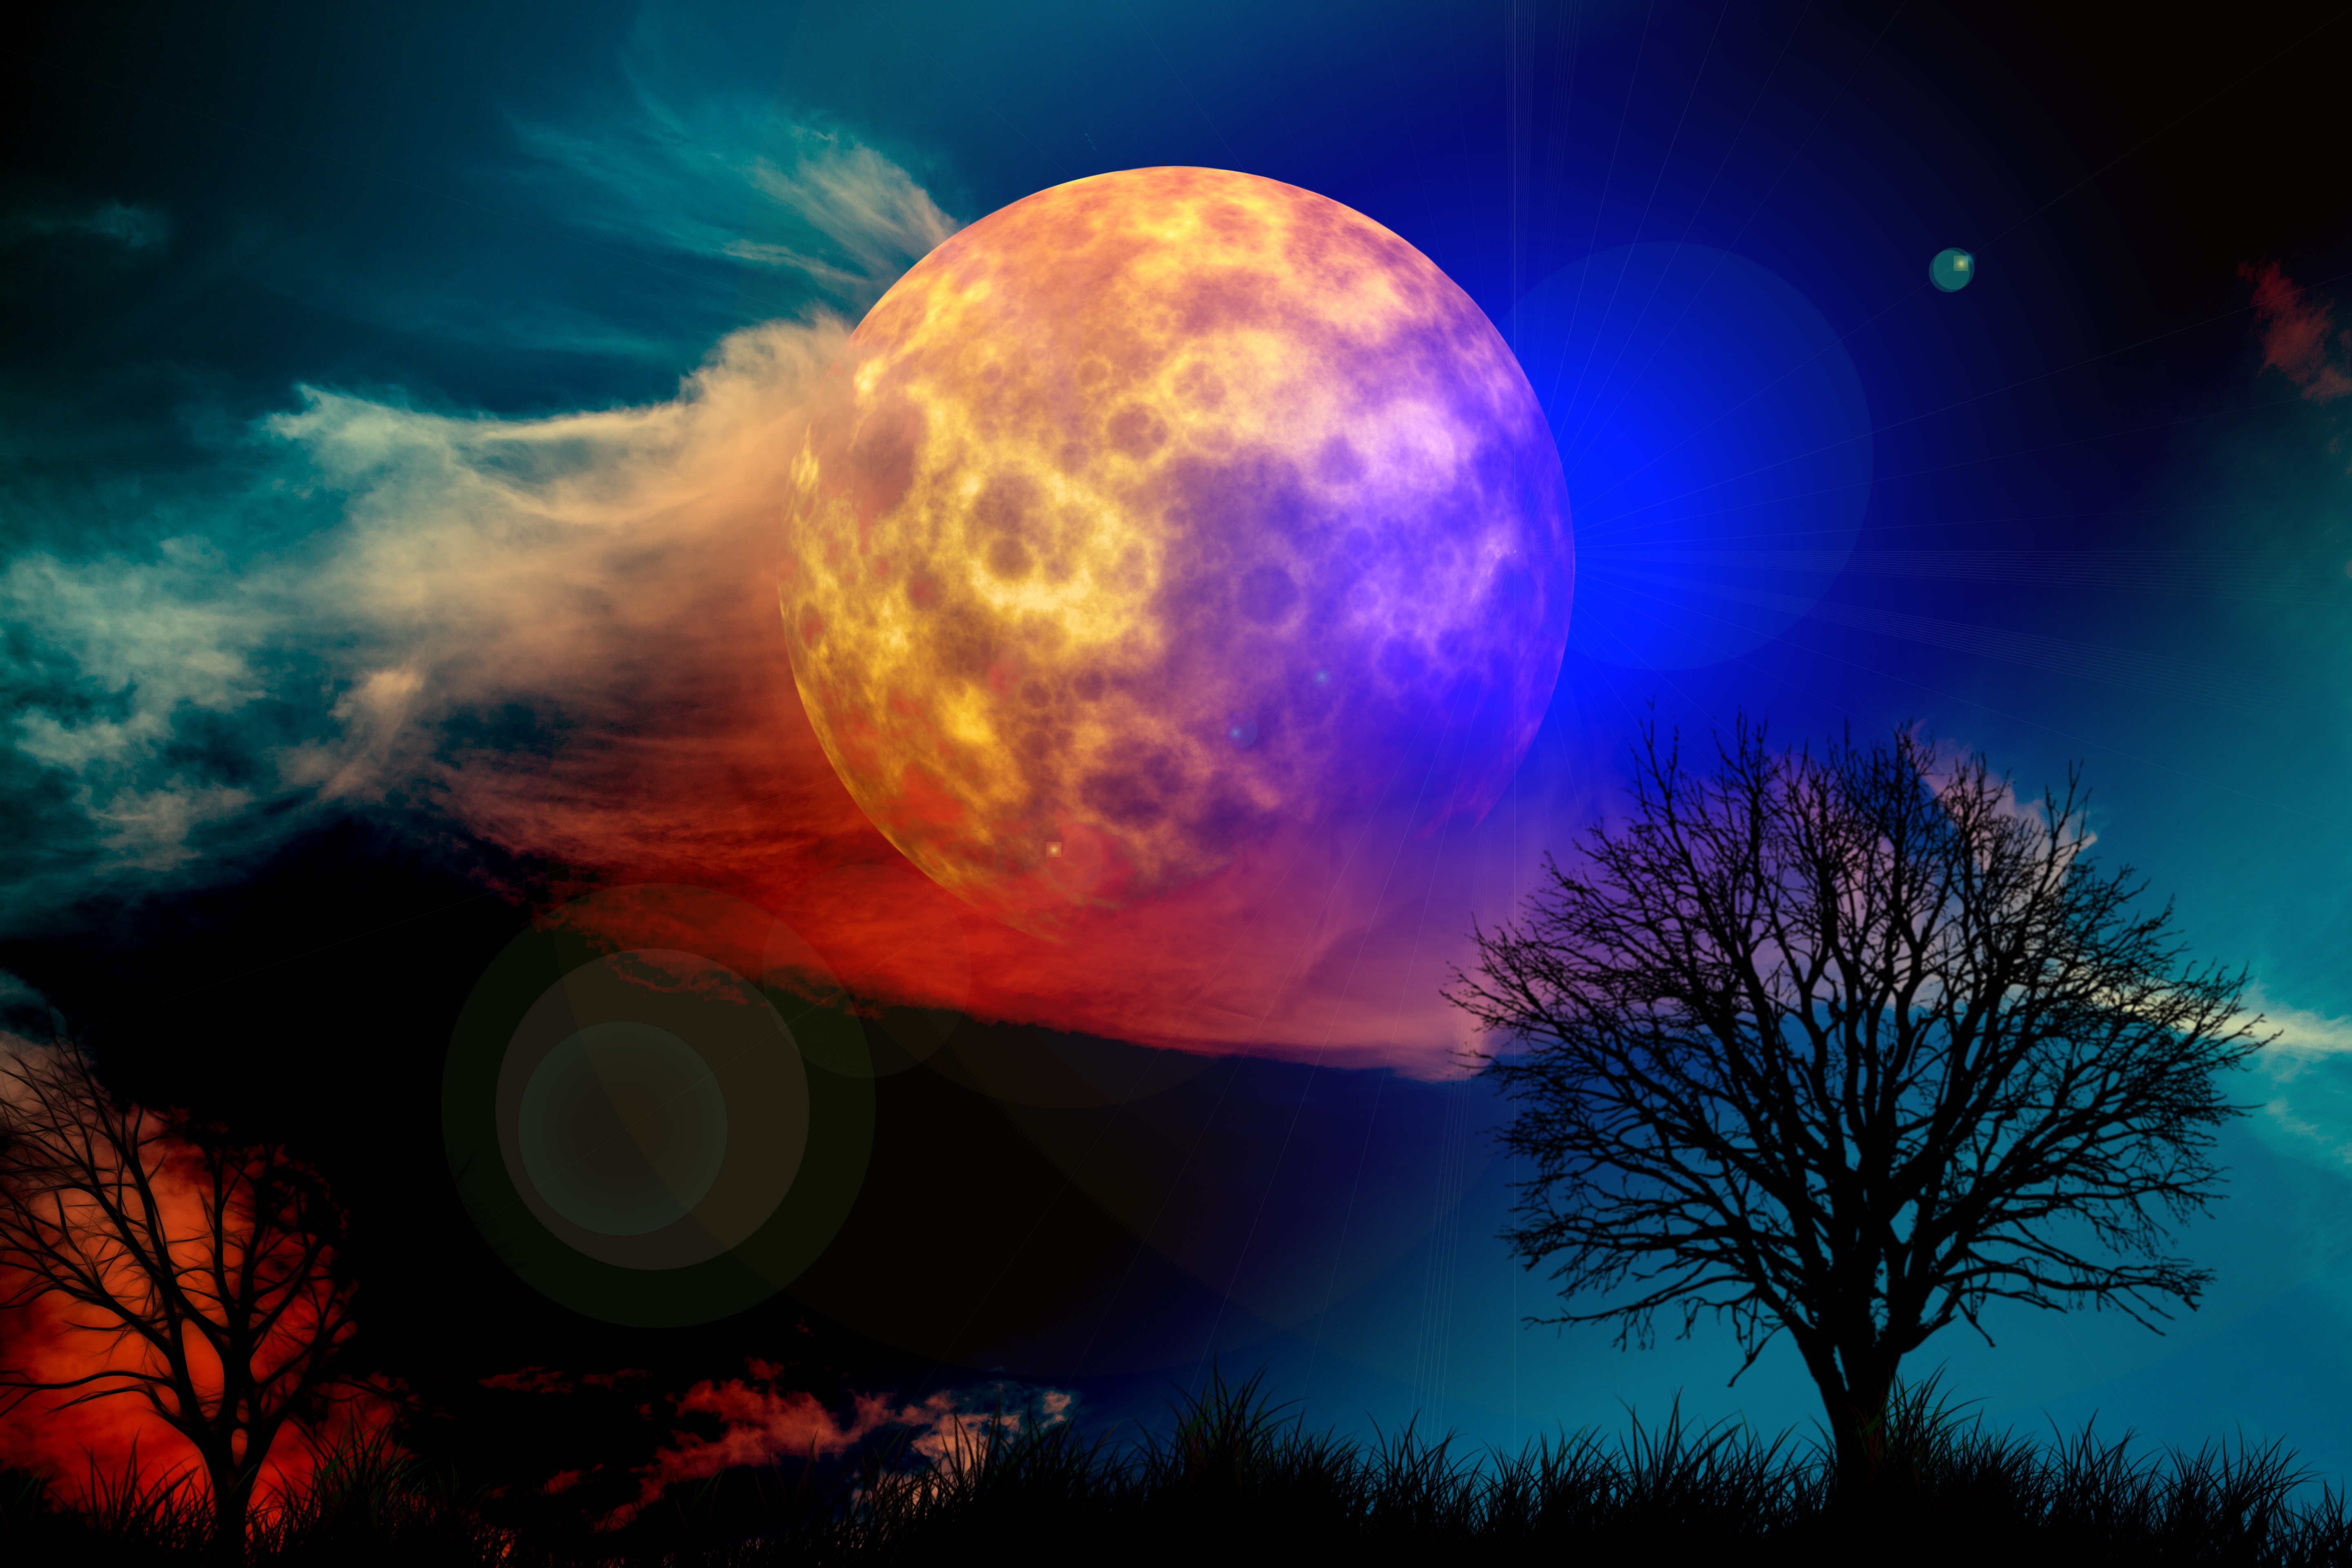 Moon tree clouds wallpaper kahl free image download